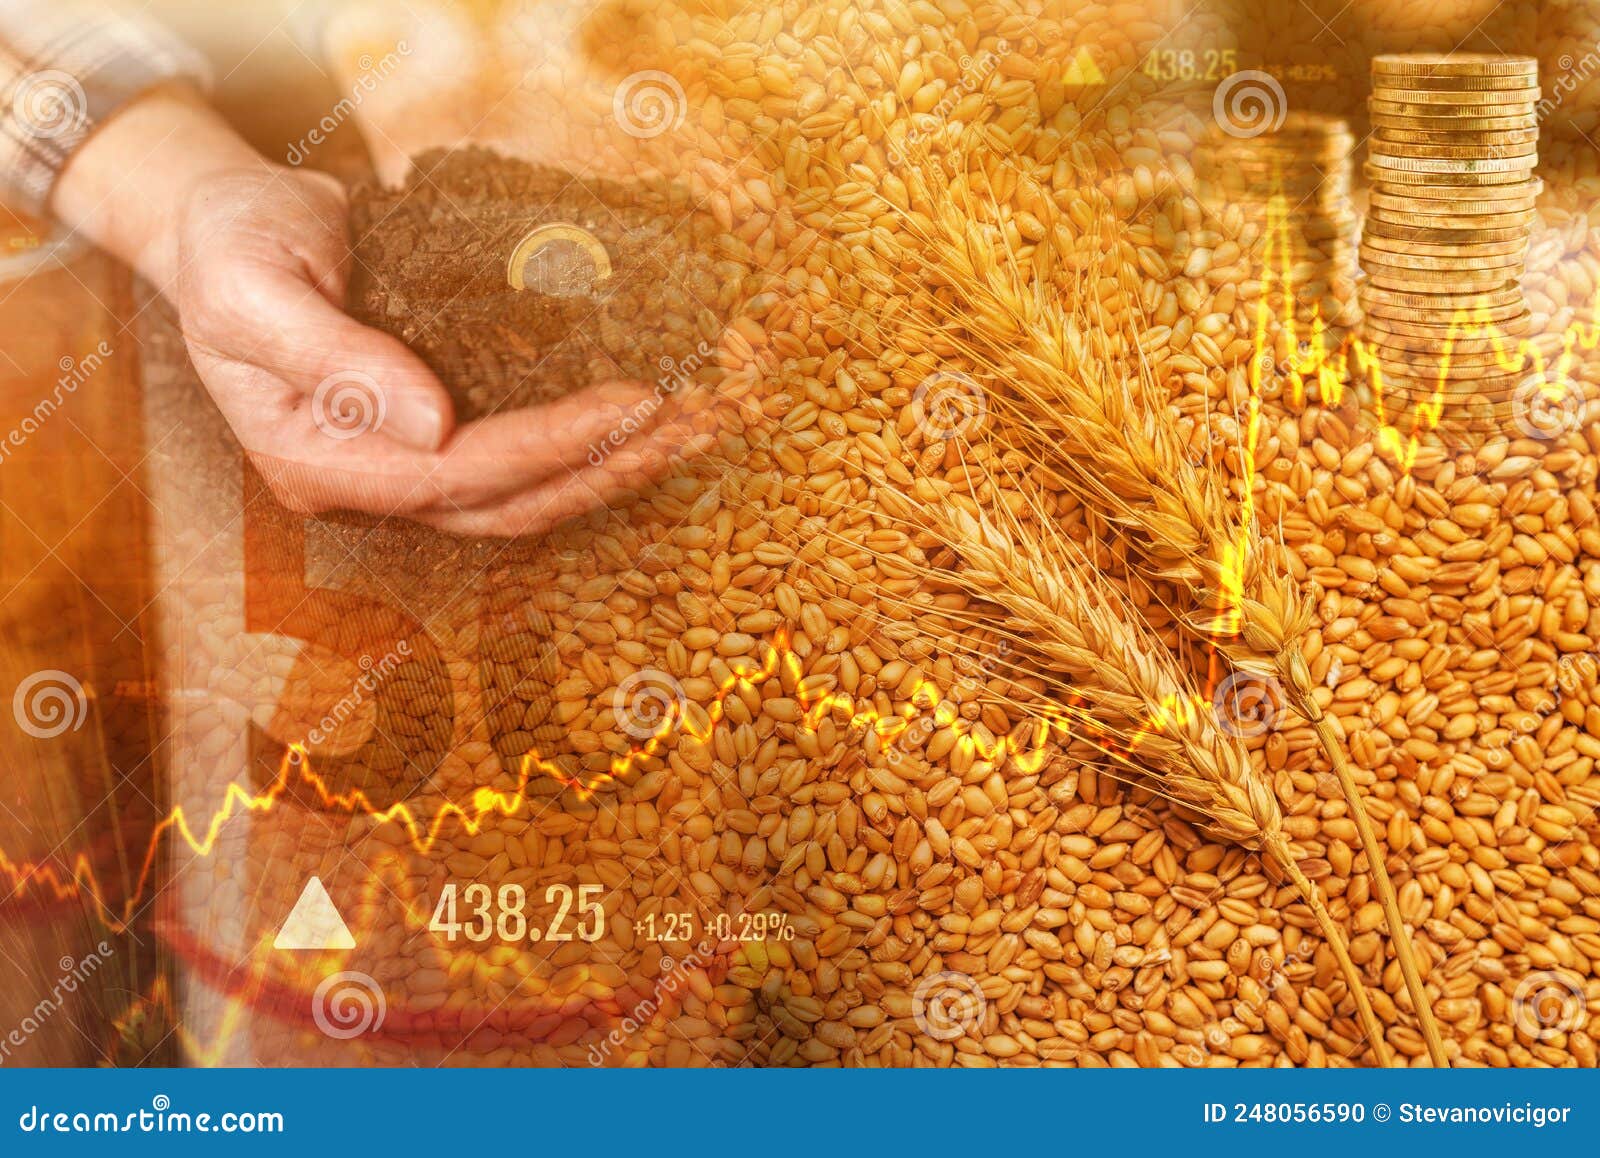 wheat commodity price increase